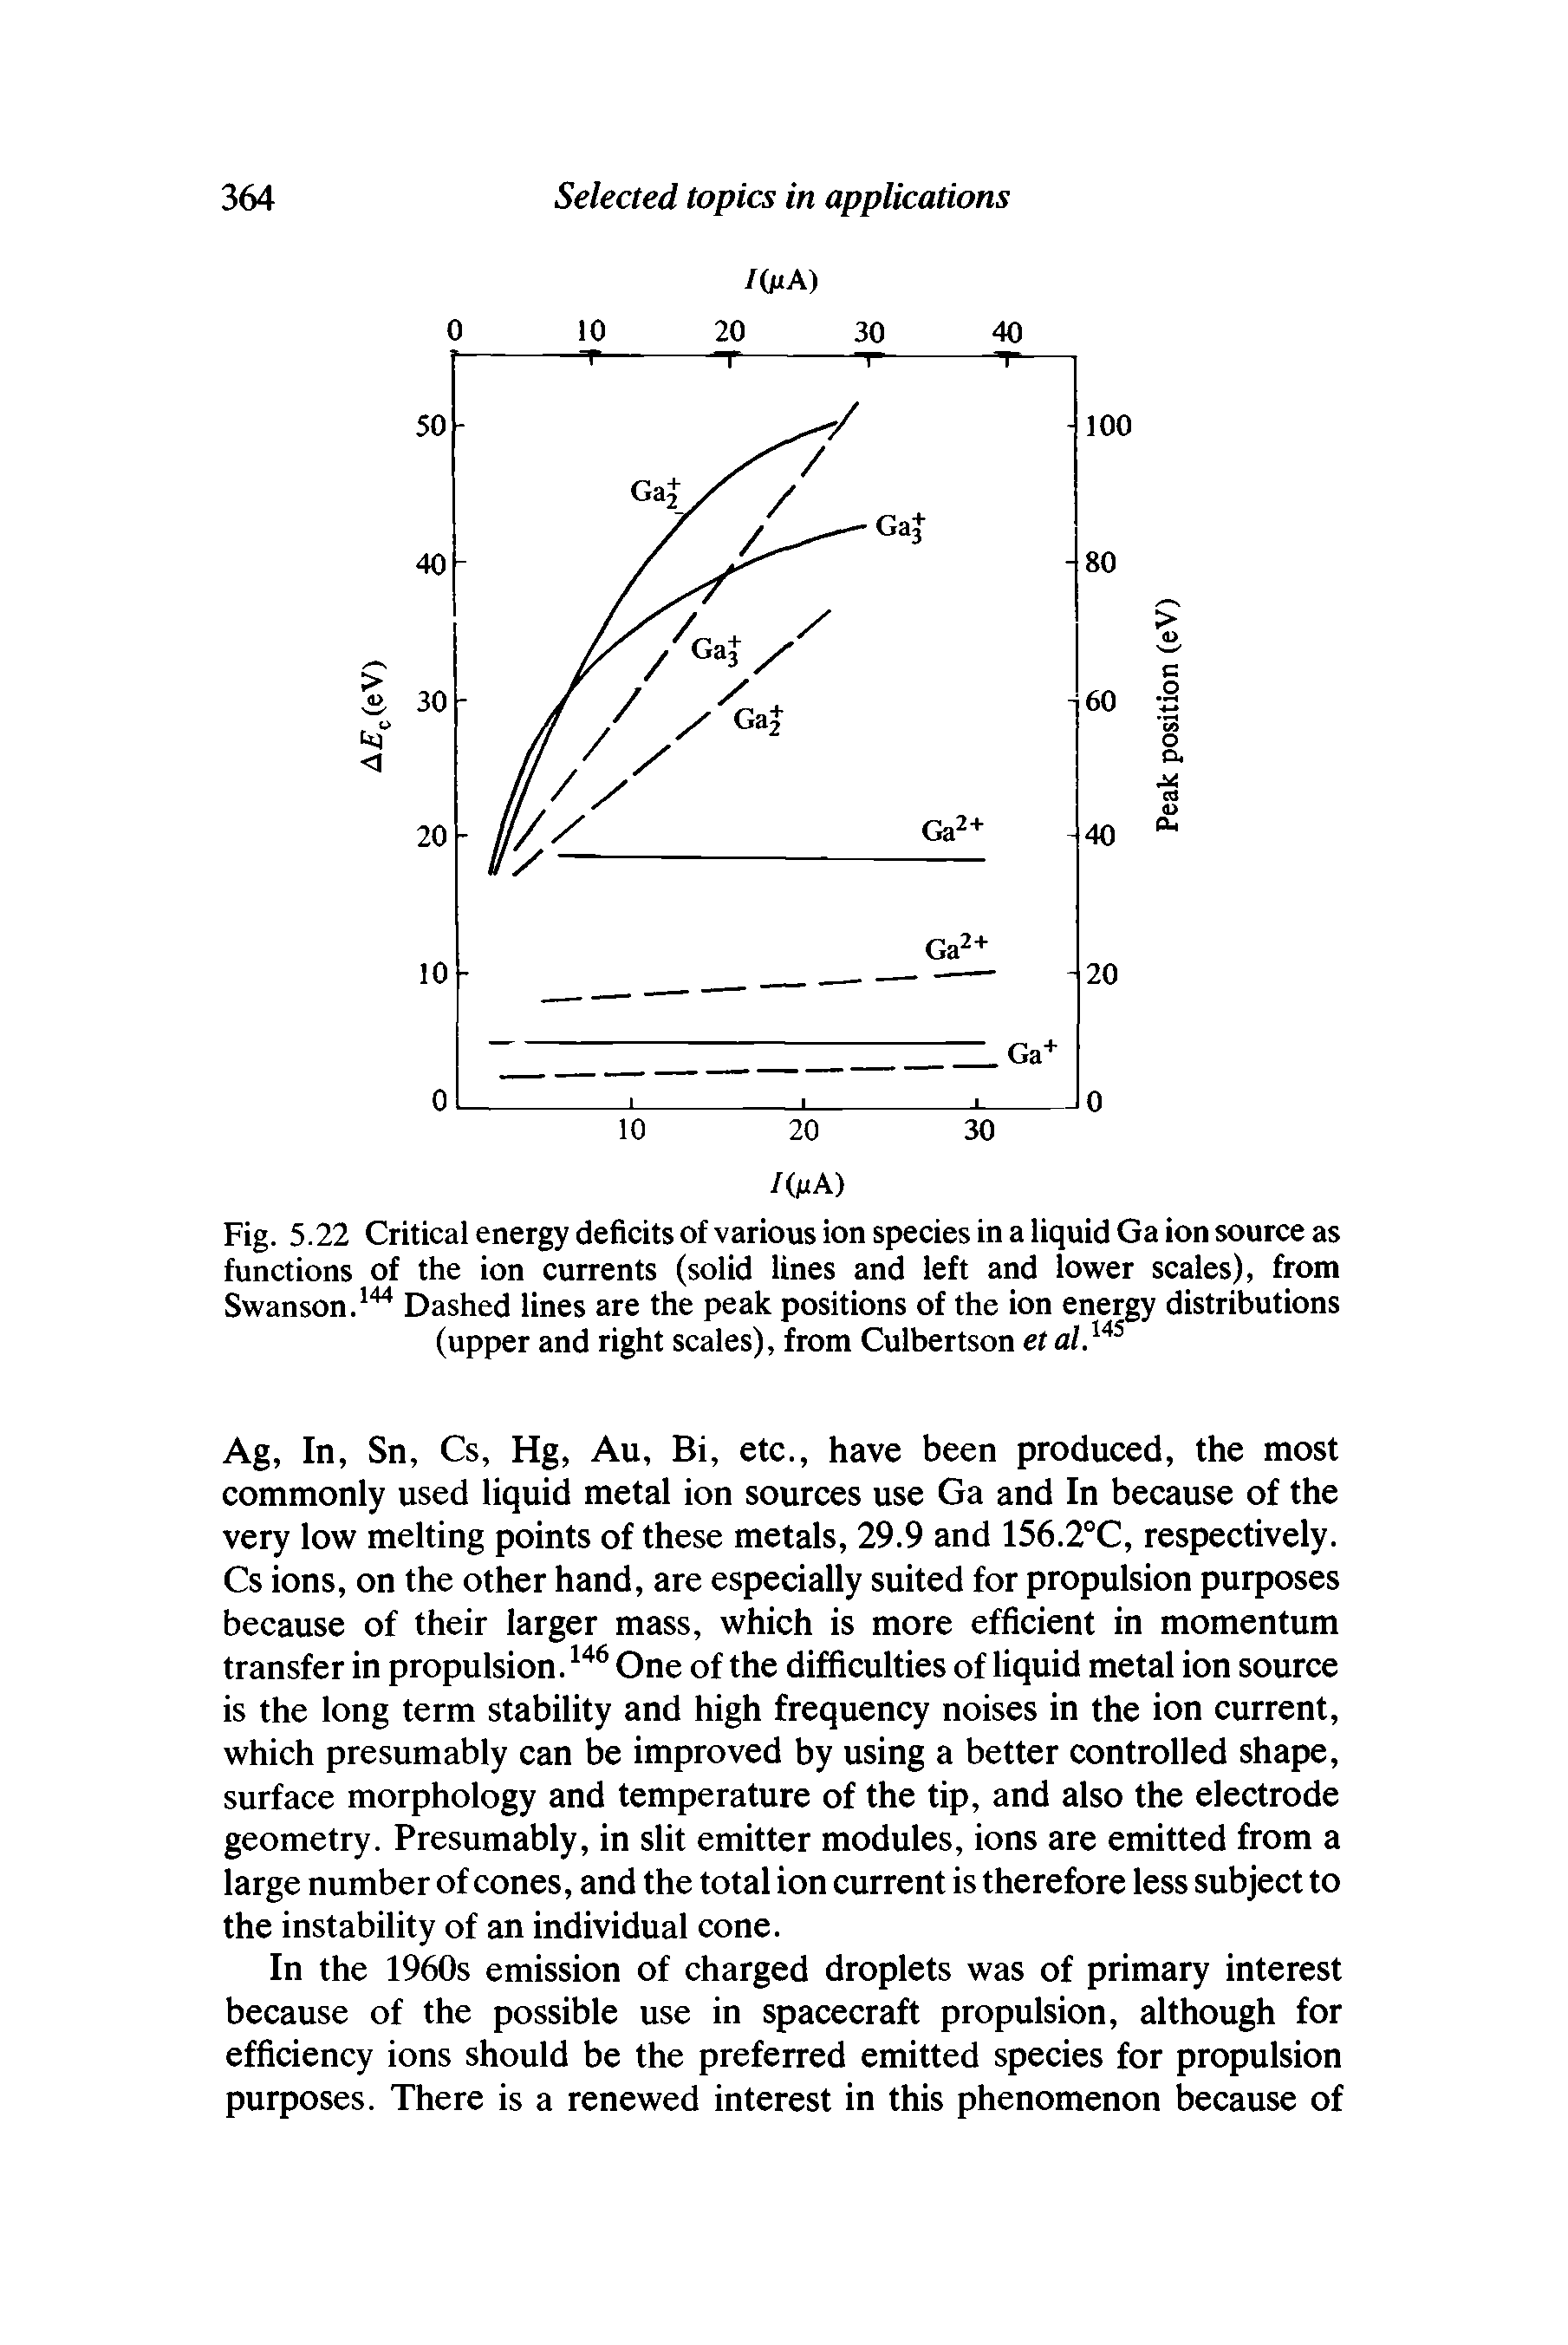 Fig. 5.22 Critical energy deficits of various ion species in a liquid Ga ion source as functions of the ion currents (solid lines and left and lower scales), from Swanson.144 Dashed lines are the peak positions of the ion energy distributions (upper and right scales), from Culbertson et al.145...